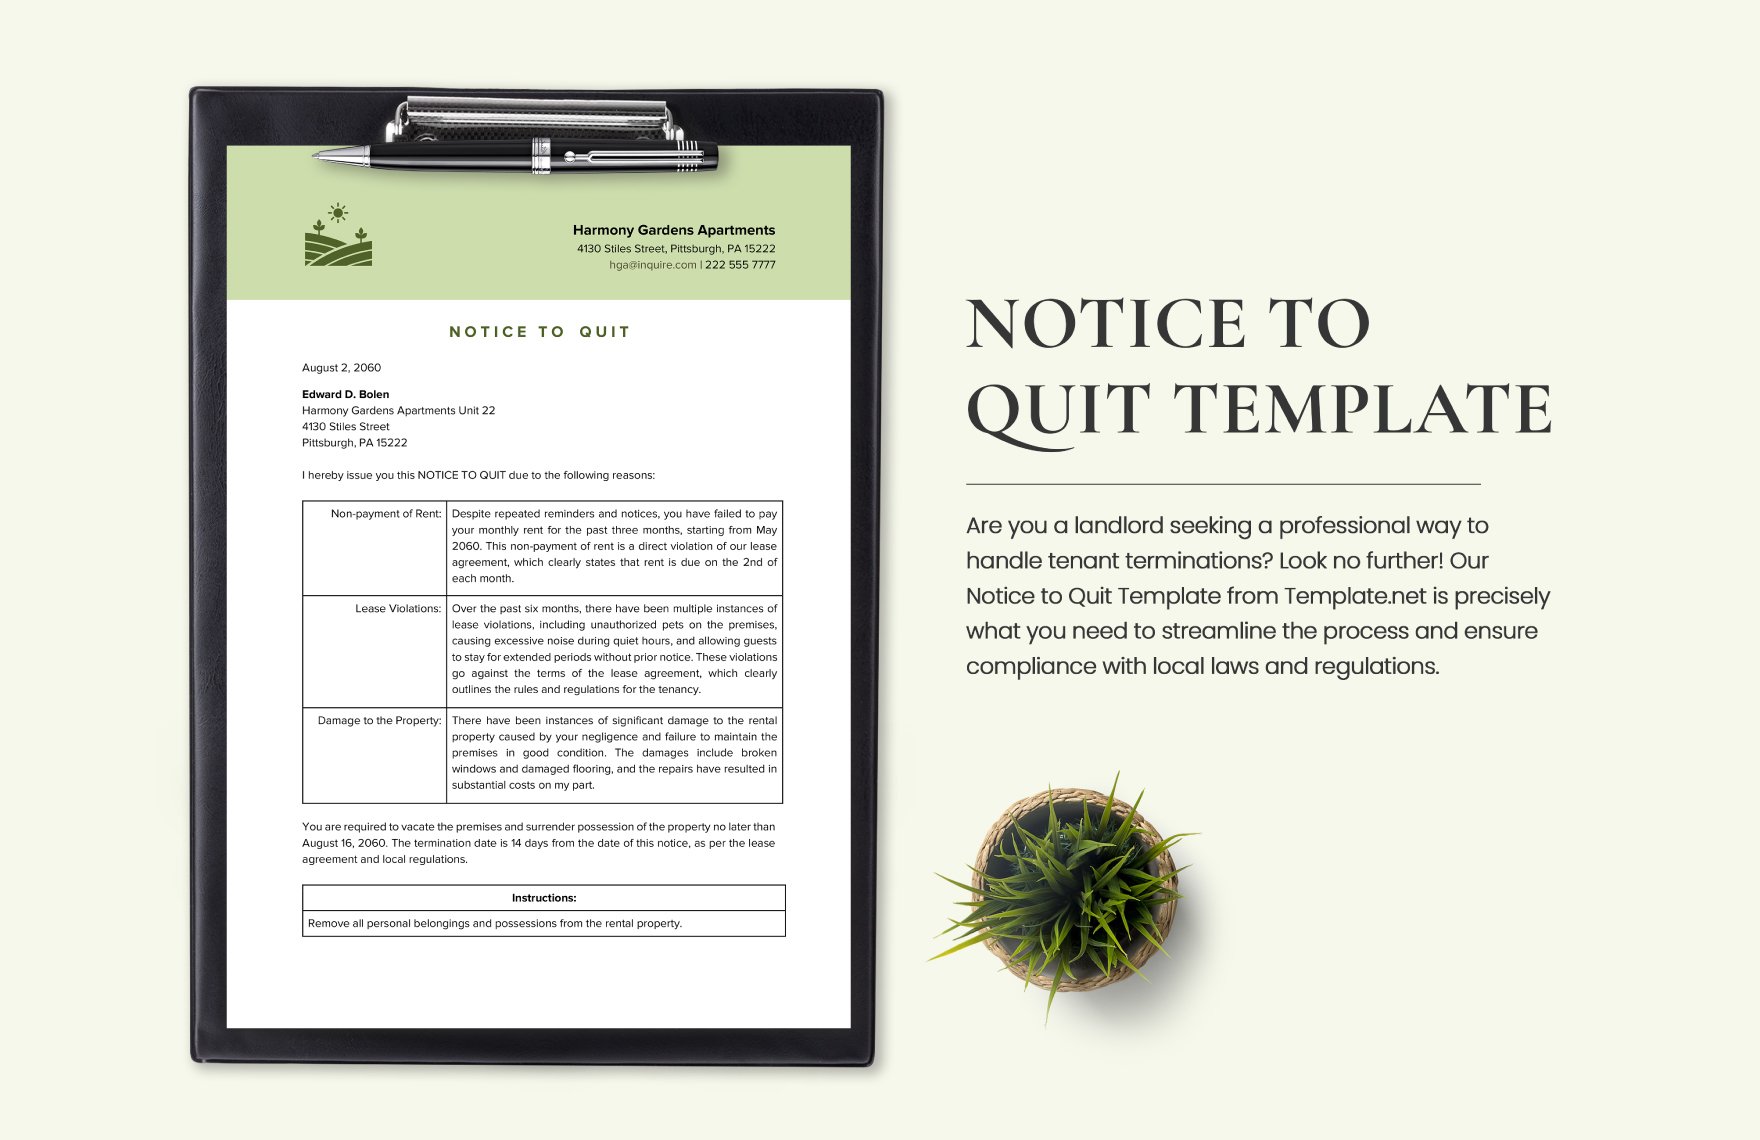 Notice to Quit Template